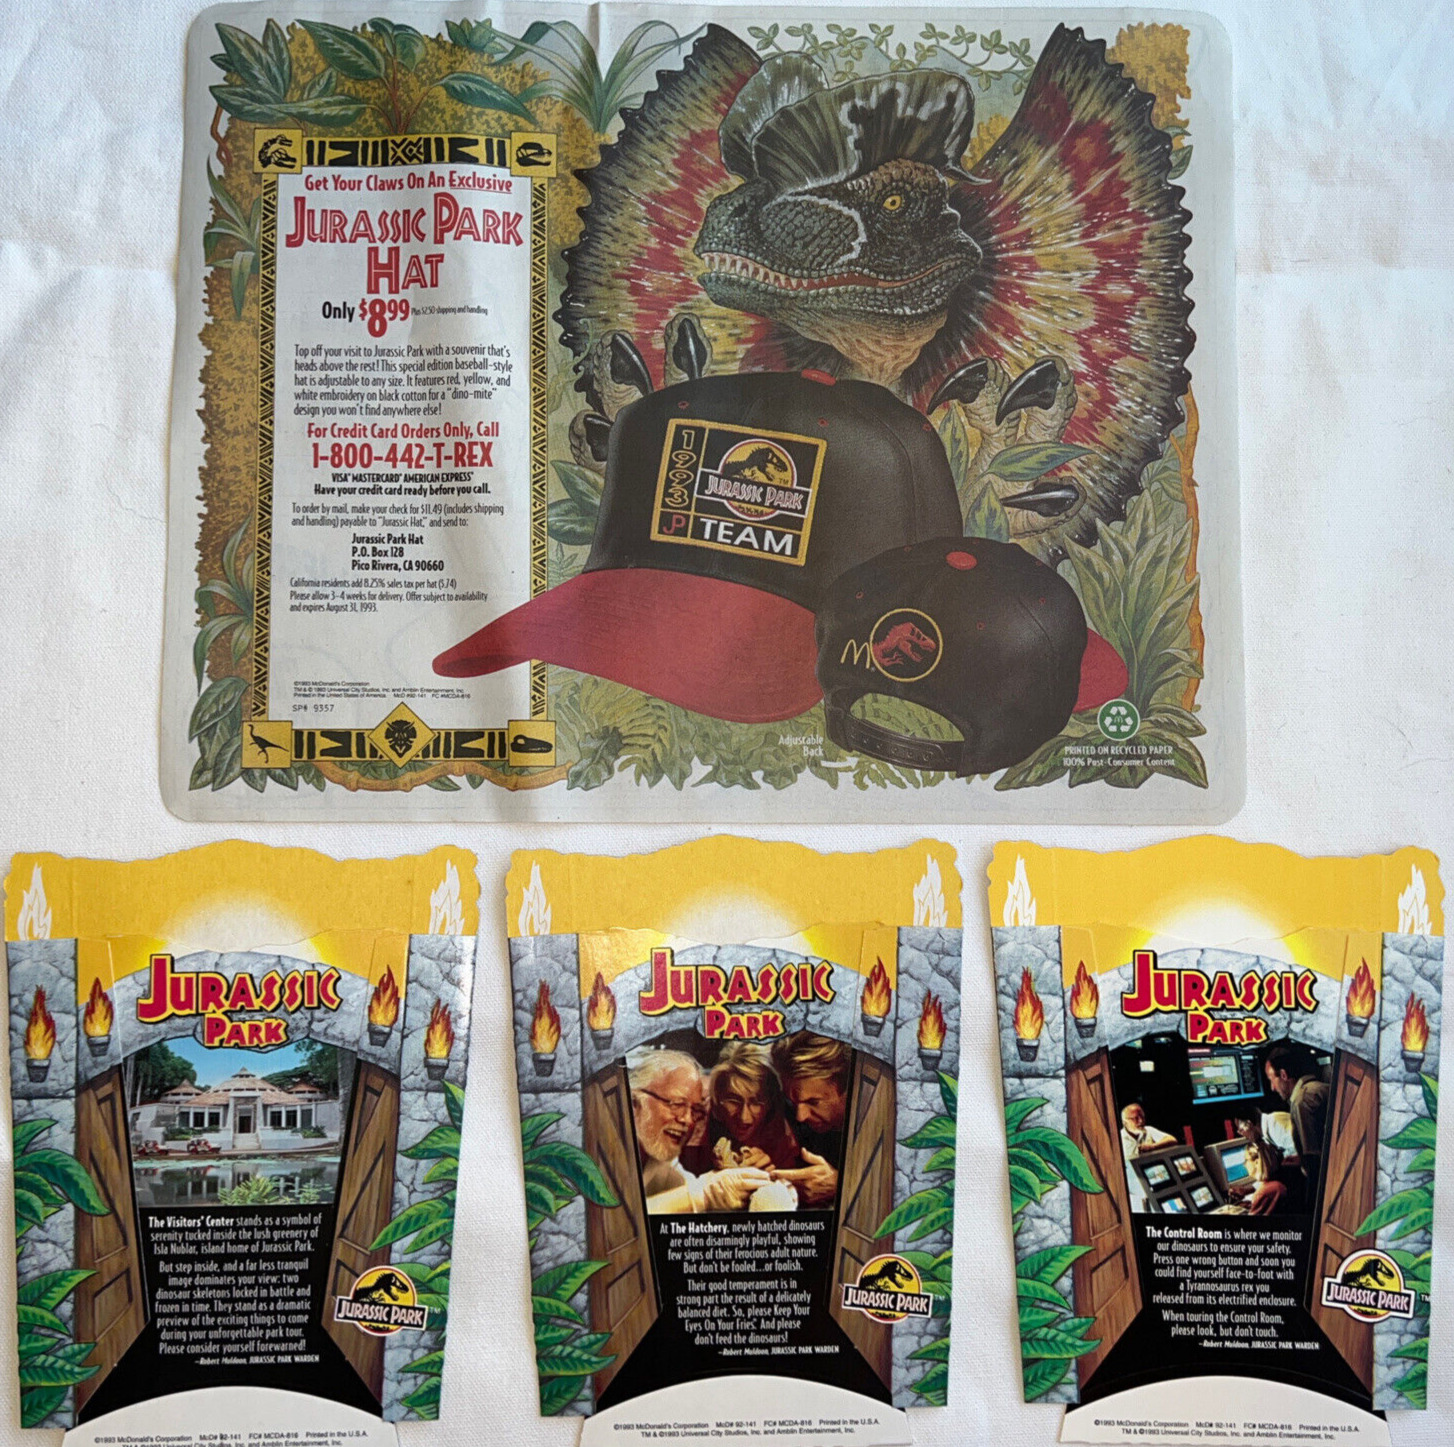 JURASSIC PARK/McDonald’s Complete Set Of 3 Fry Boxes and Placemat - BRAND NEW